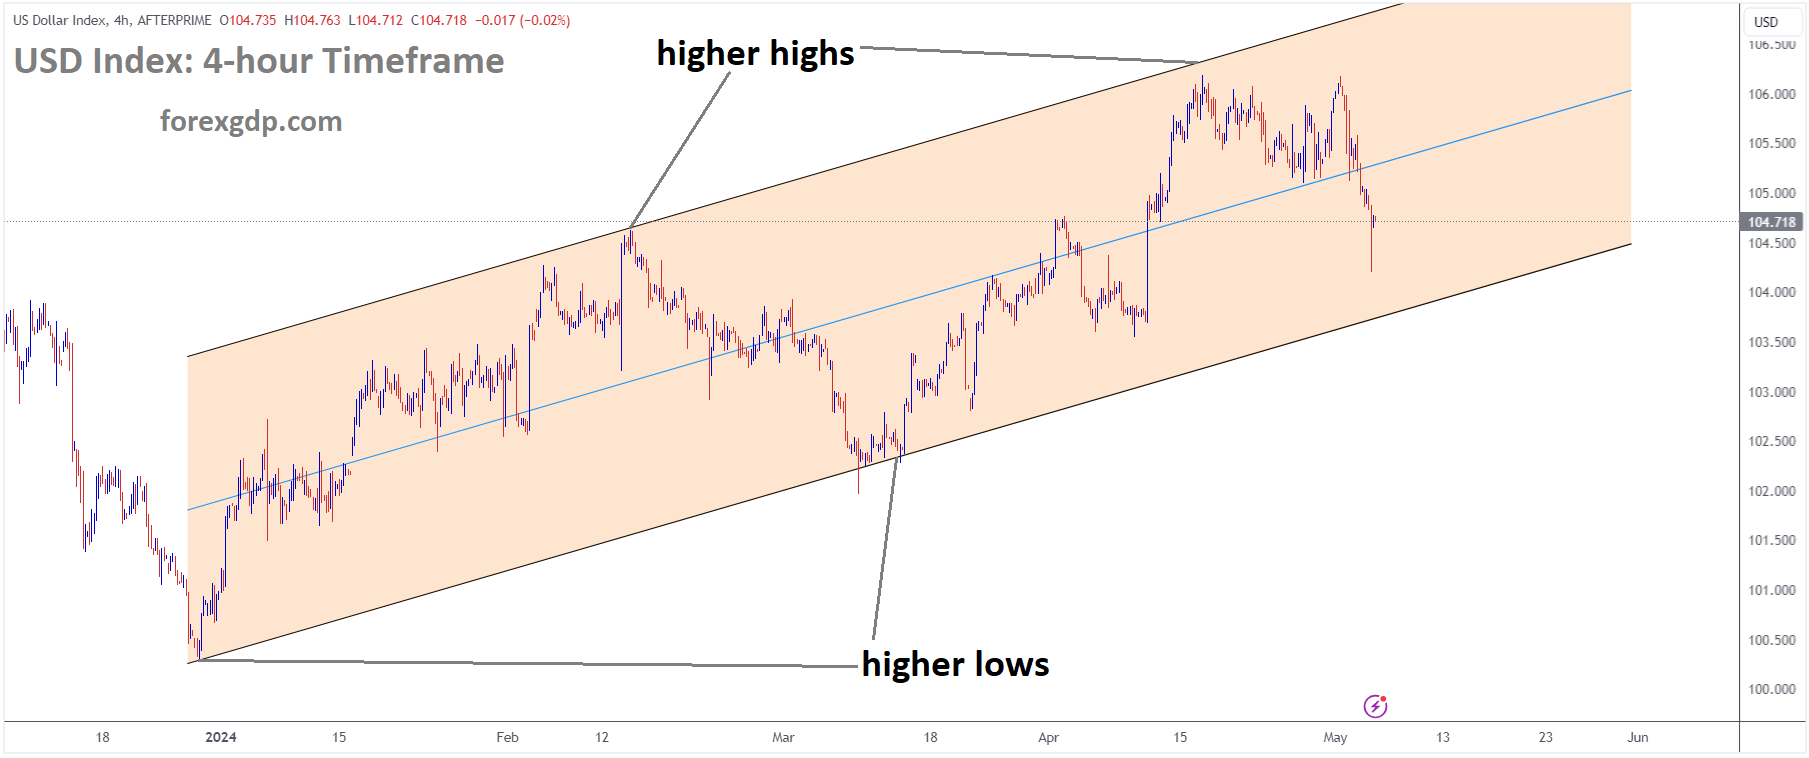 USD Index Market Price is moving in Ascending channel and market has fallen from the higher high area of the channel